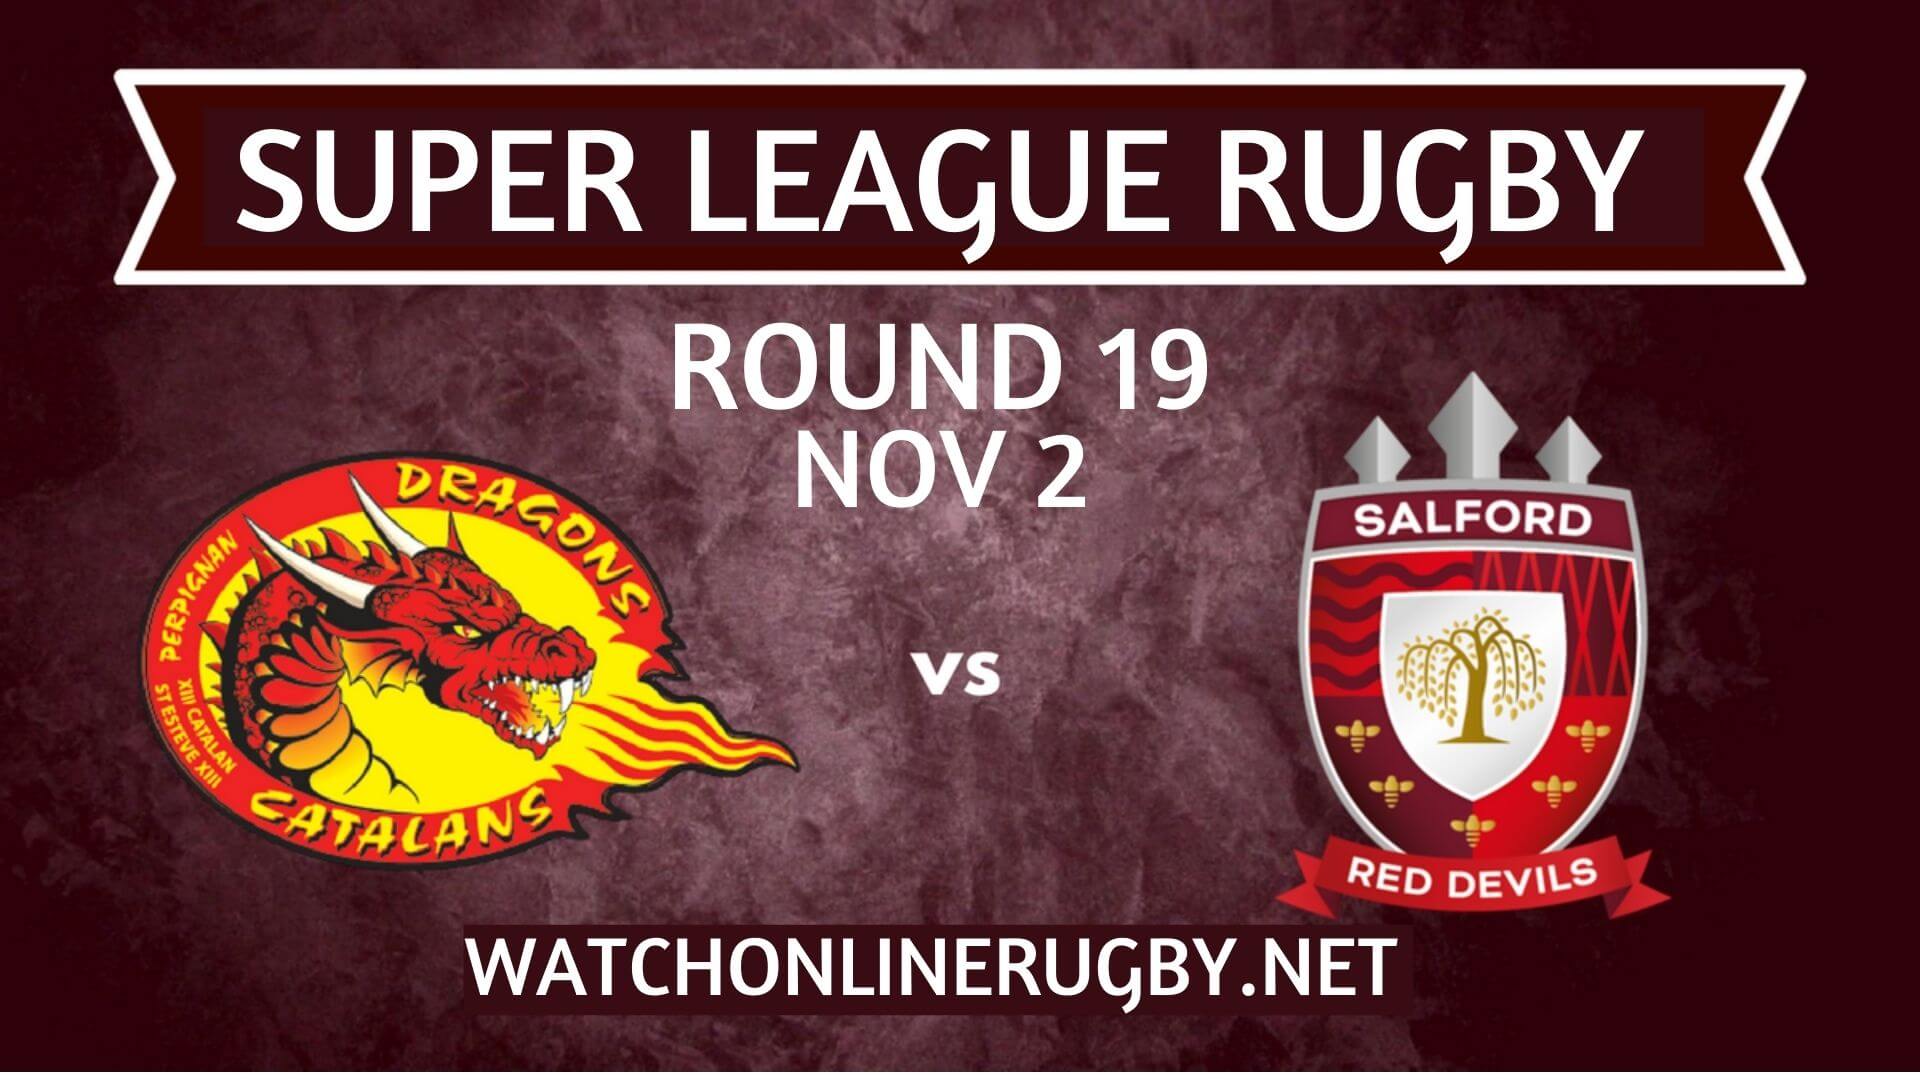 Salford Red Devils vs Catalans Dragons Super League Rugby 2020 RD 19